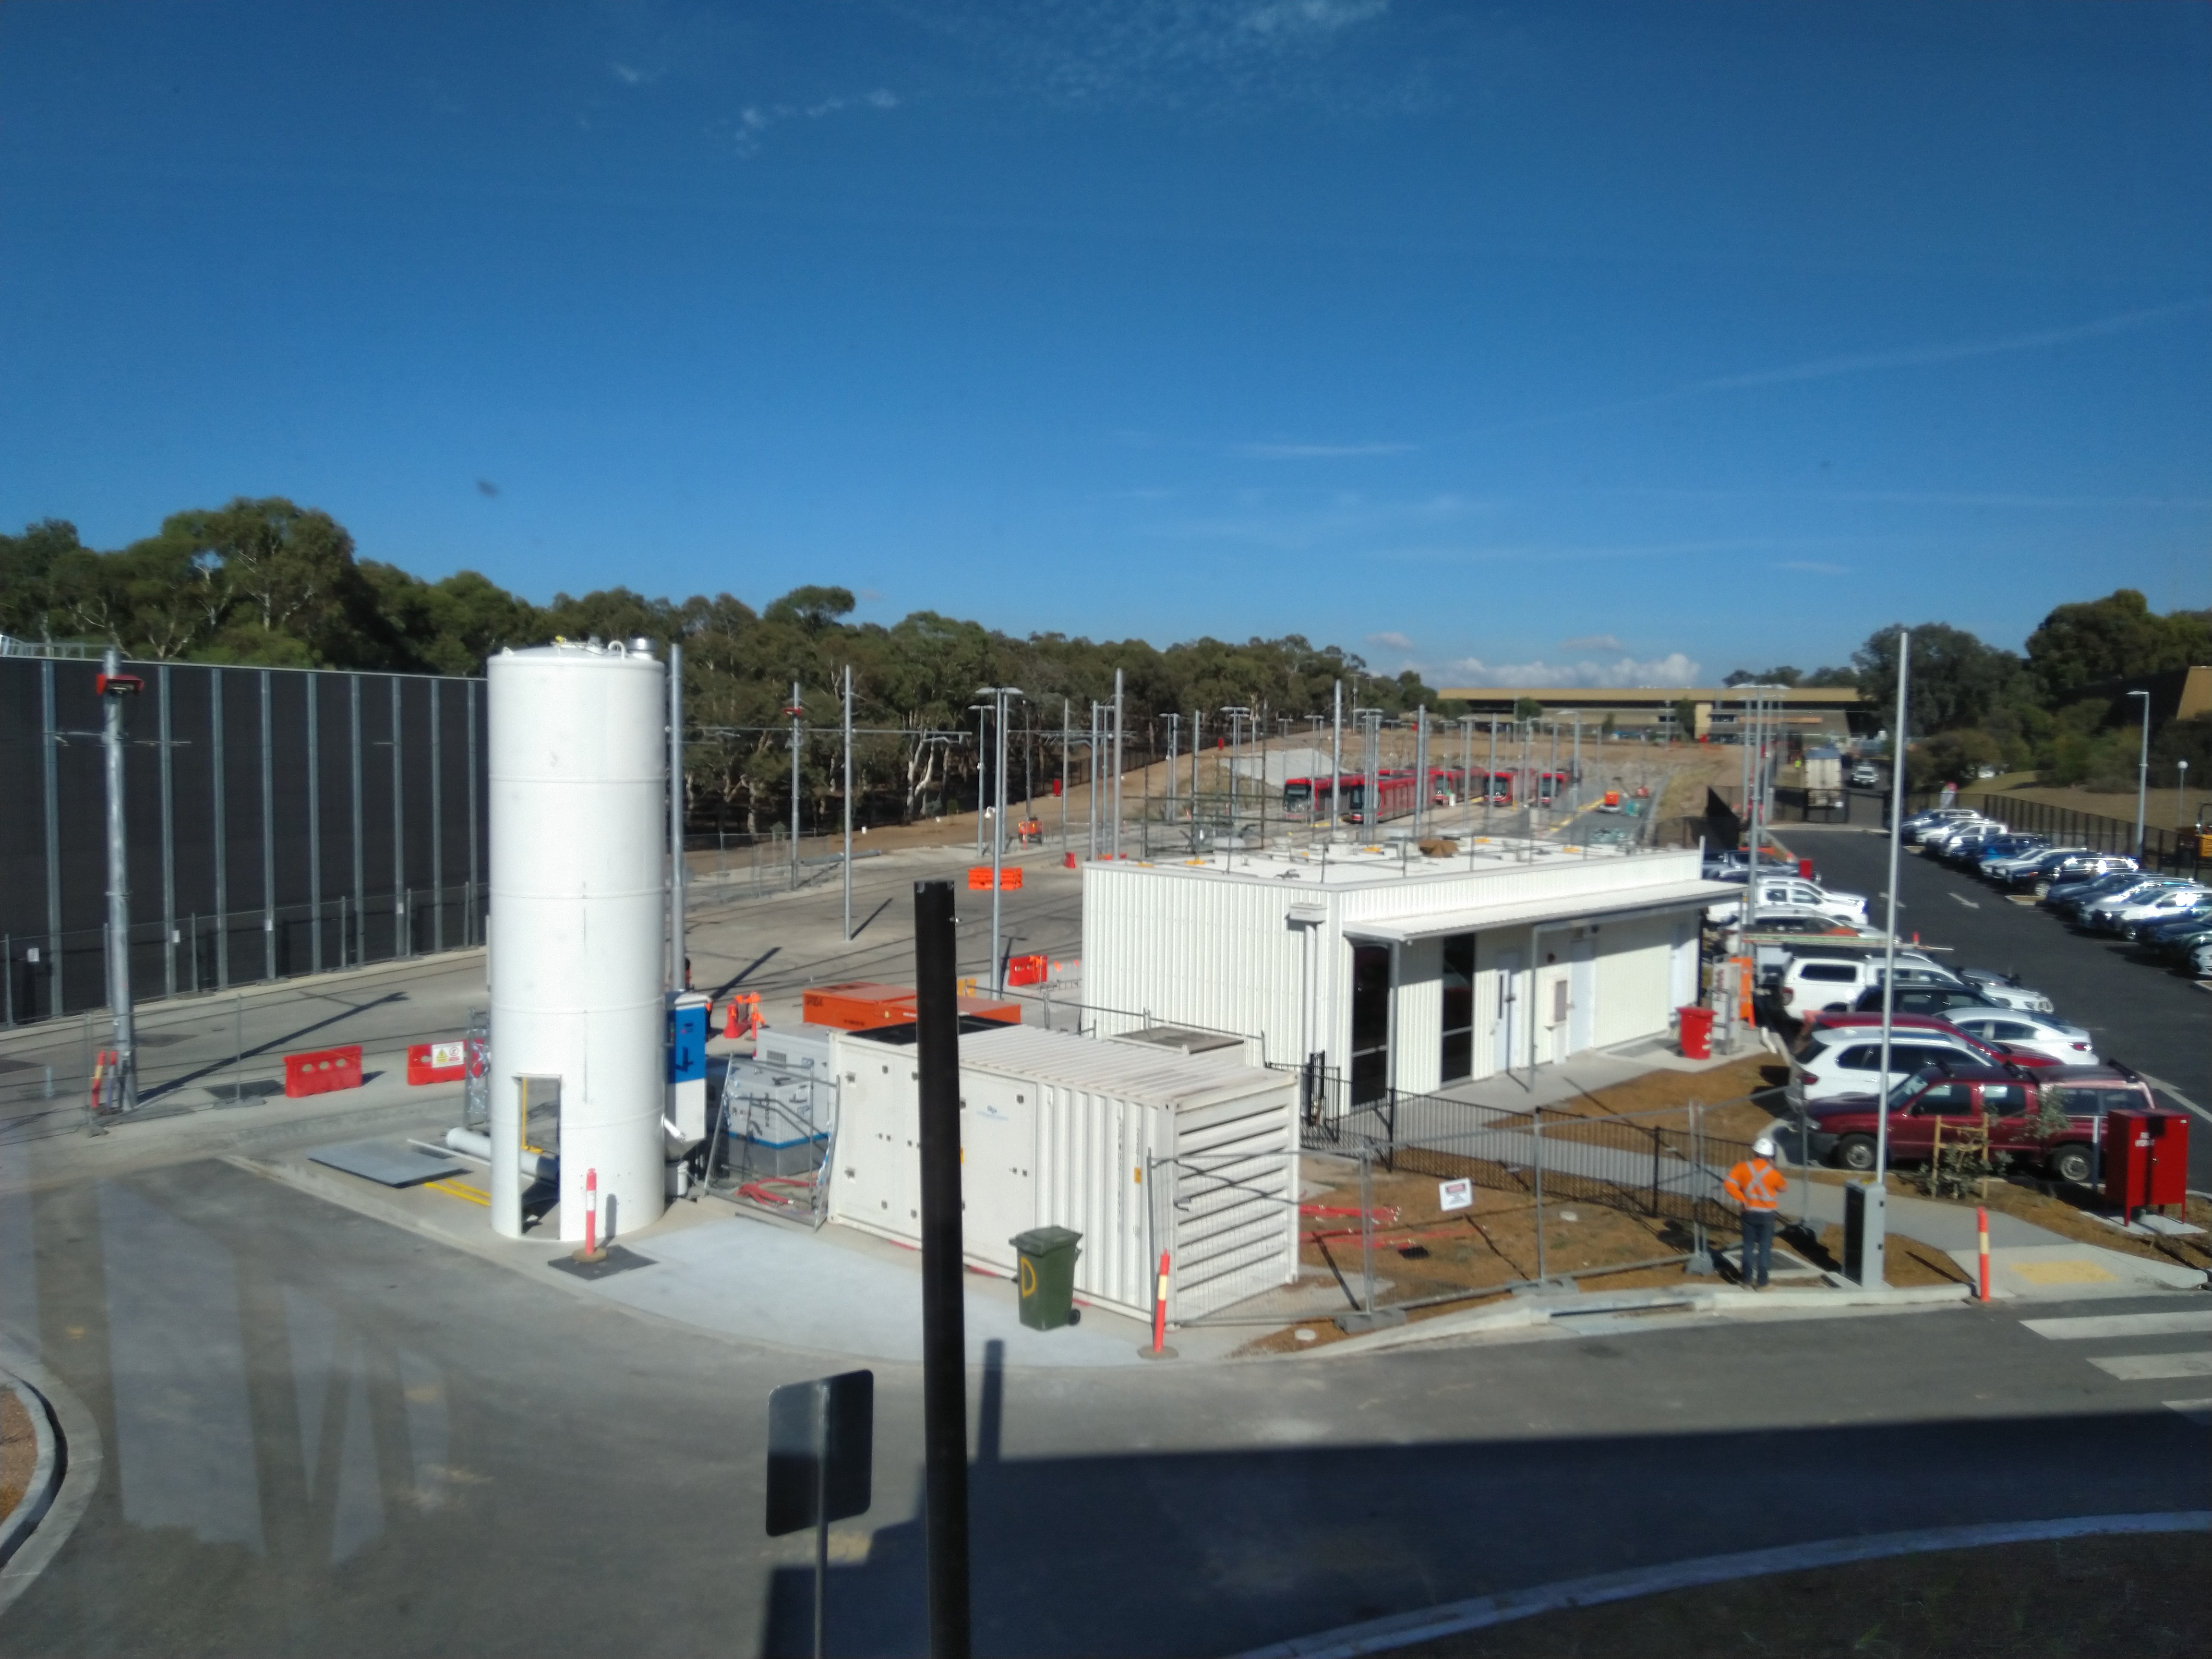 That large cylinder is a sand tower. Sand is used in the braking system to enhance friction between steel wheels and steel tracks, in an emergency. The building next to the carpark is the backup control centre. In the background the railyard, that houses the 14 light rail vehicles in our current fleet.